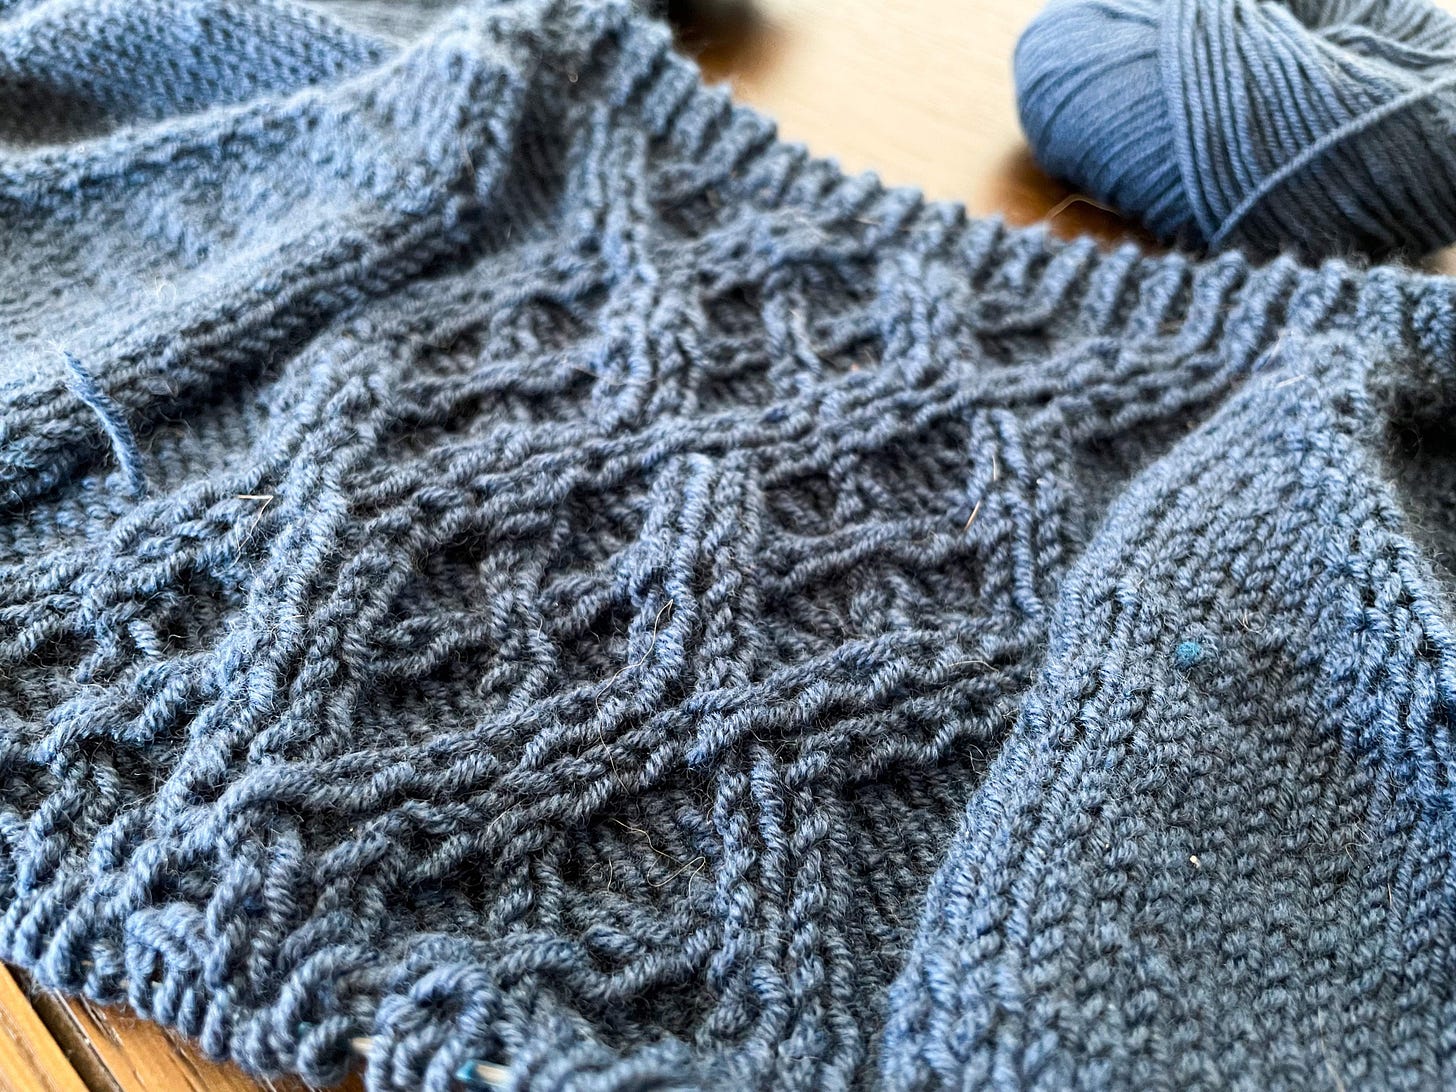 A closeup of a central cable panel on a sweater in progress.